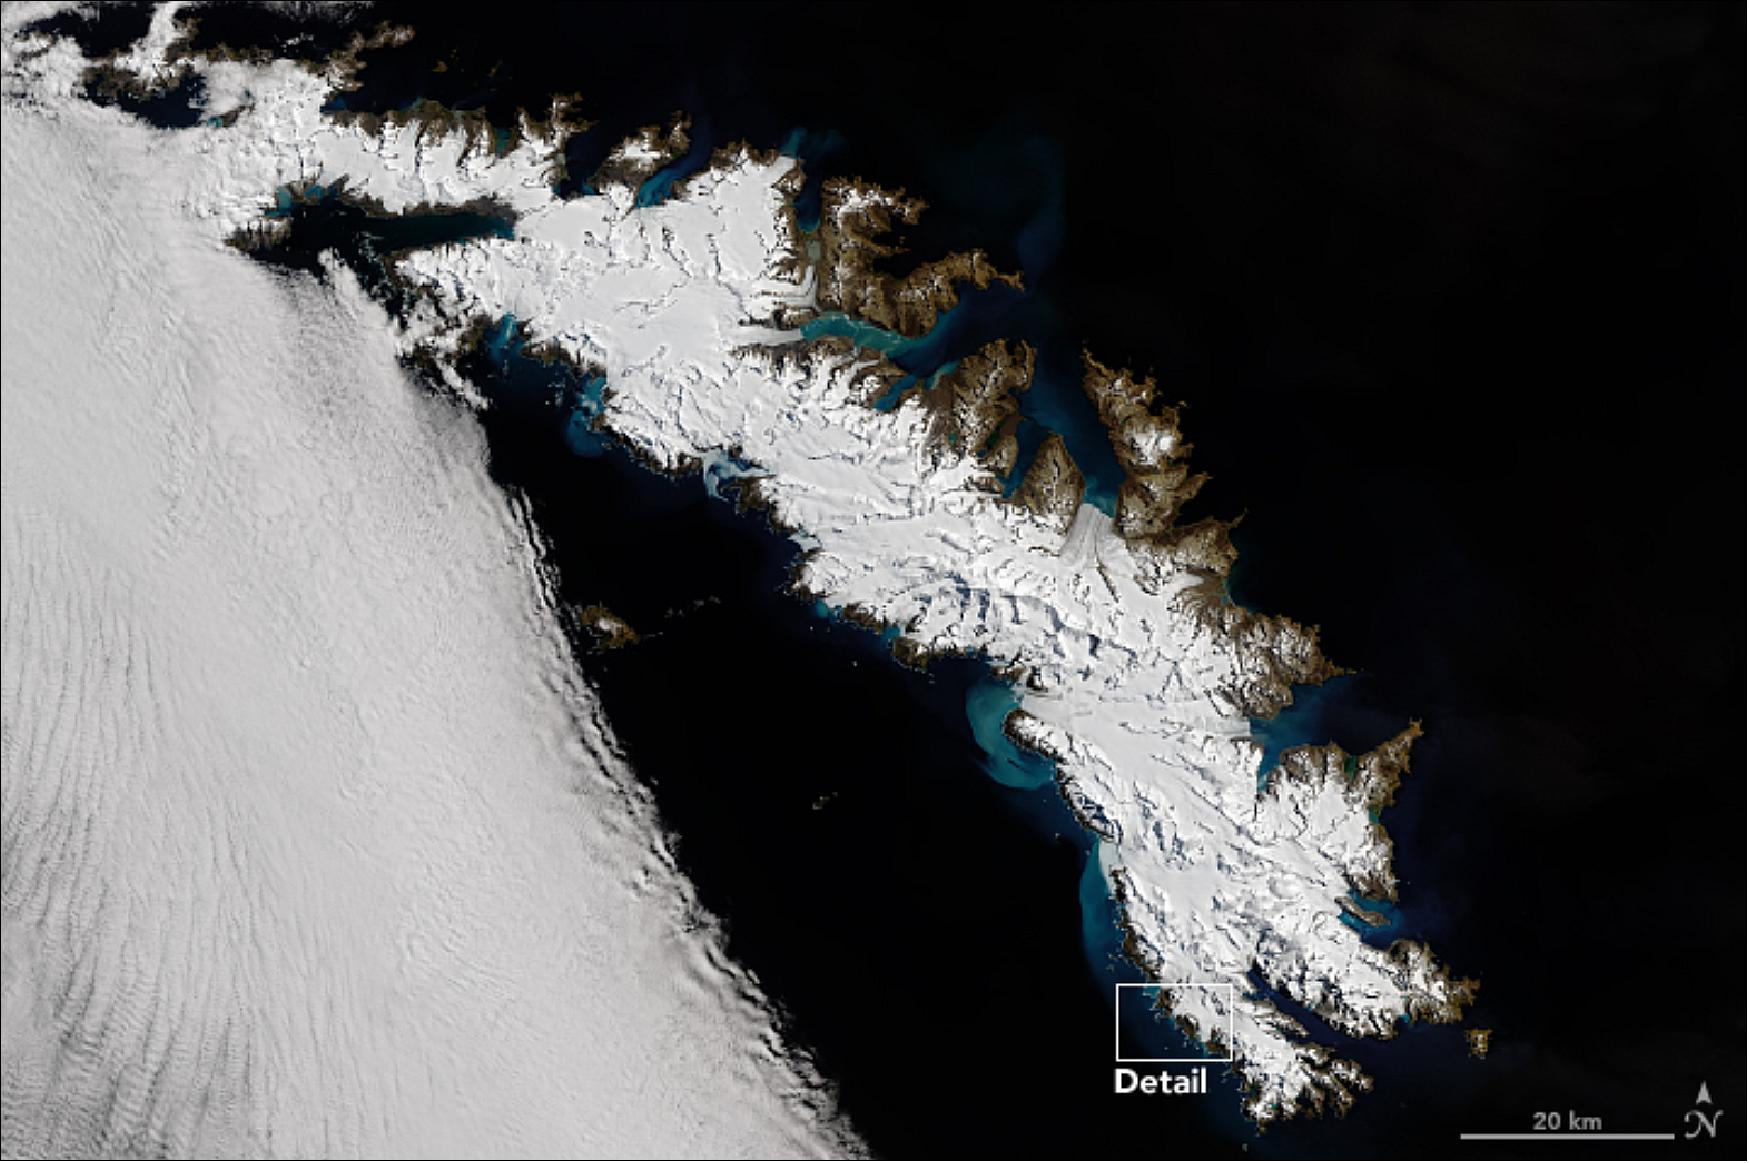 Figure 101: OLI on Landsat-8 acquired this image on December 25, 2018 showing a clear view of South Georgia and the South Sandwich Islands (image credit: NASA Earth Observatory images by Joshua Stevens, using Landsat data from the U.S. Geological Survey; story by Kasha Patel)